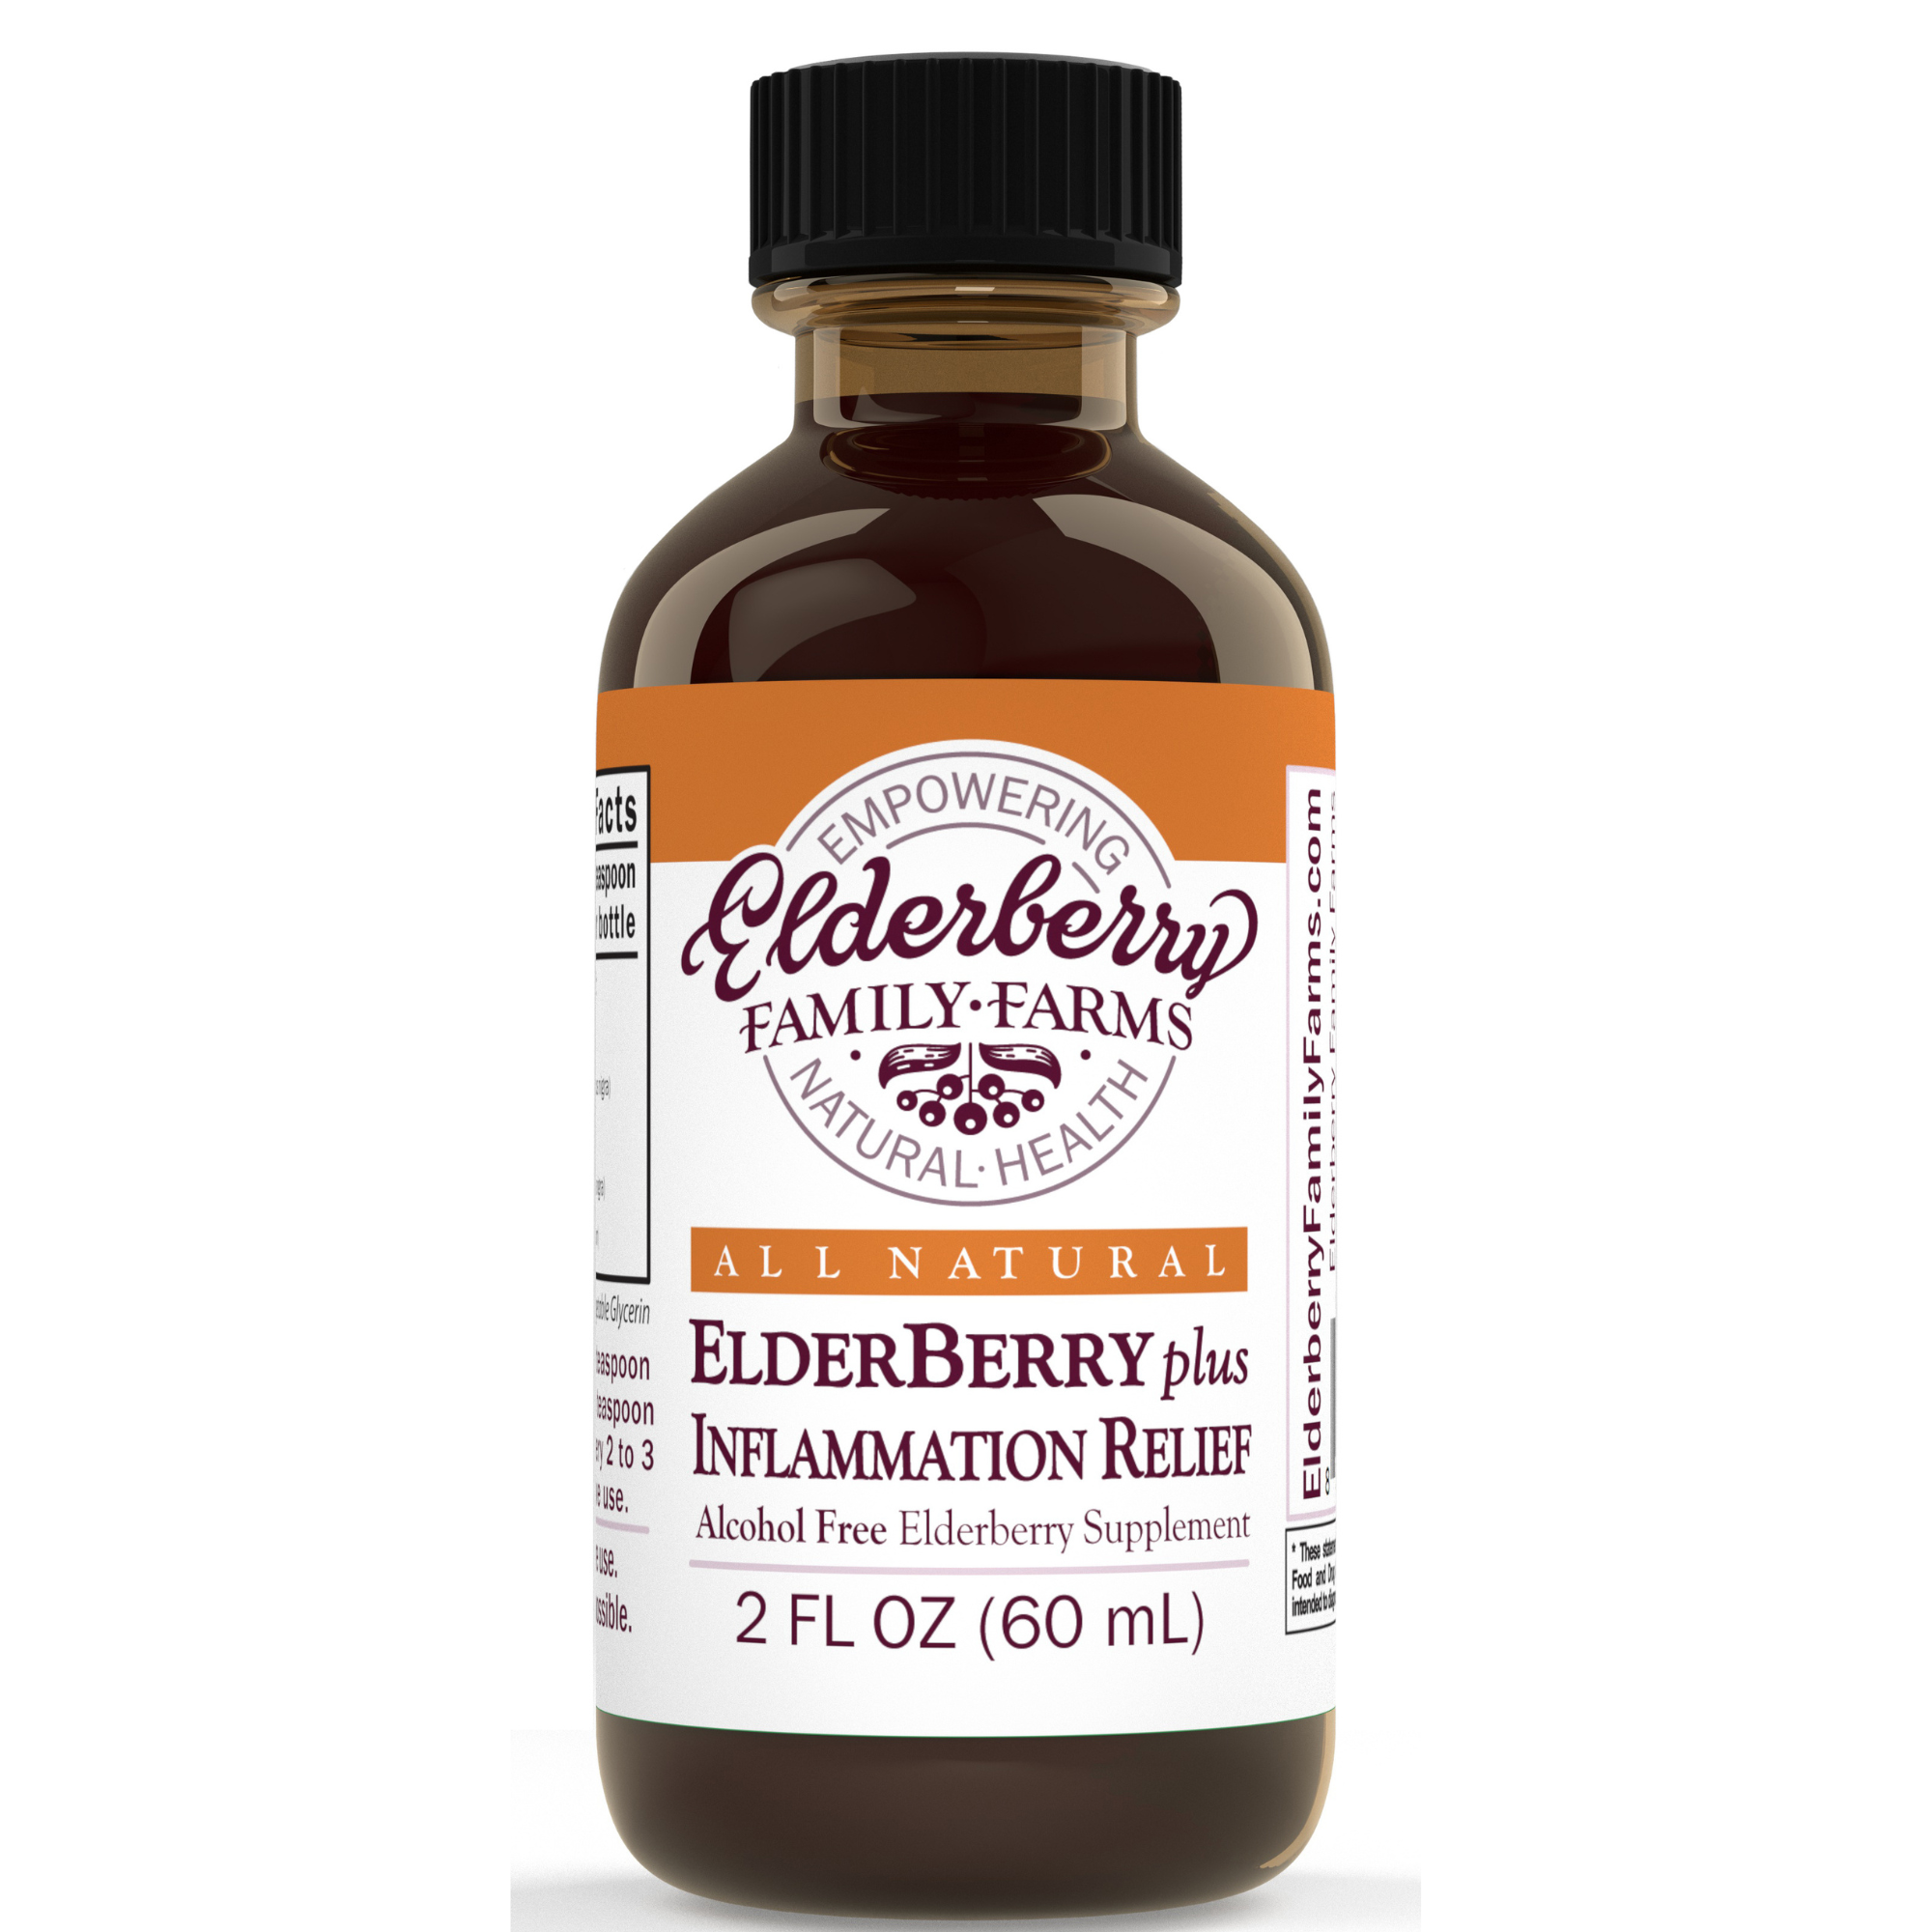 Elderberry extract for inflammation